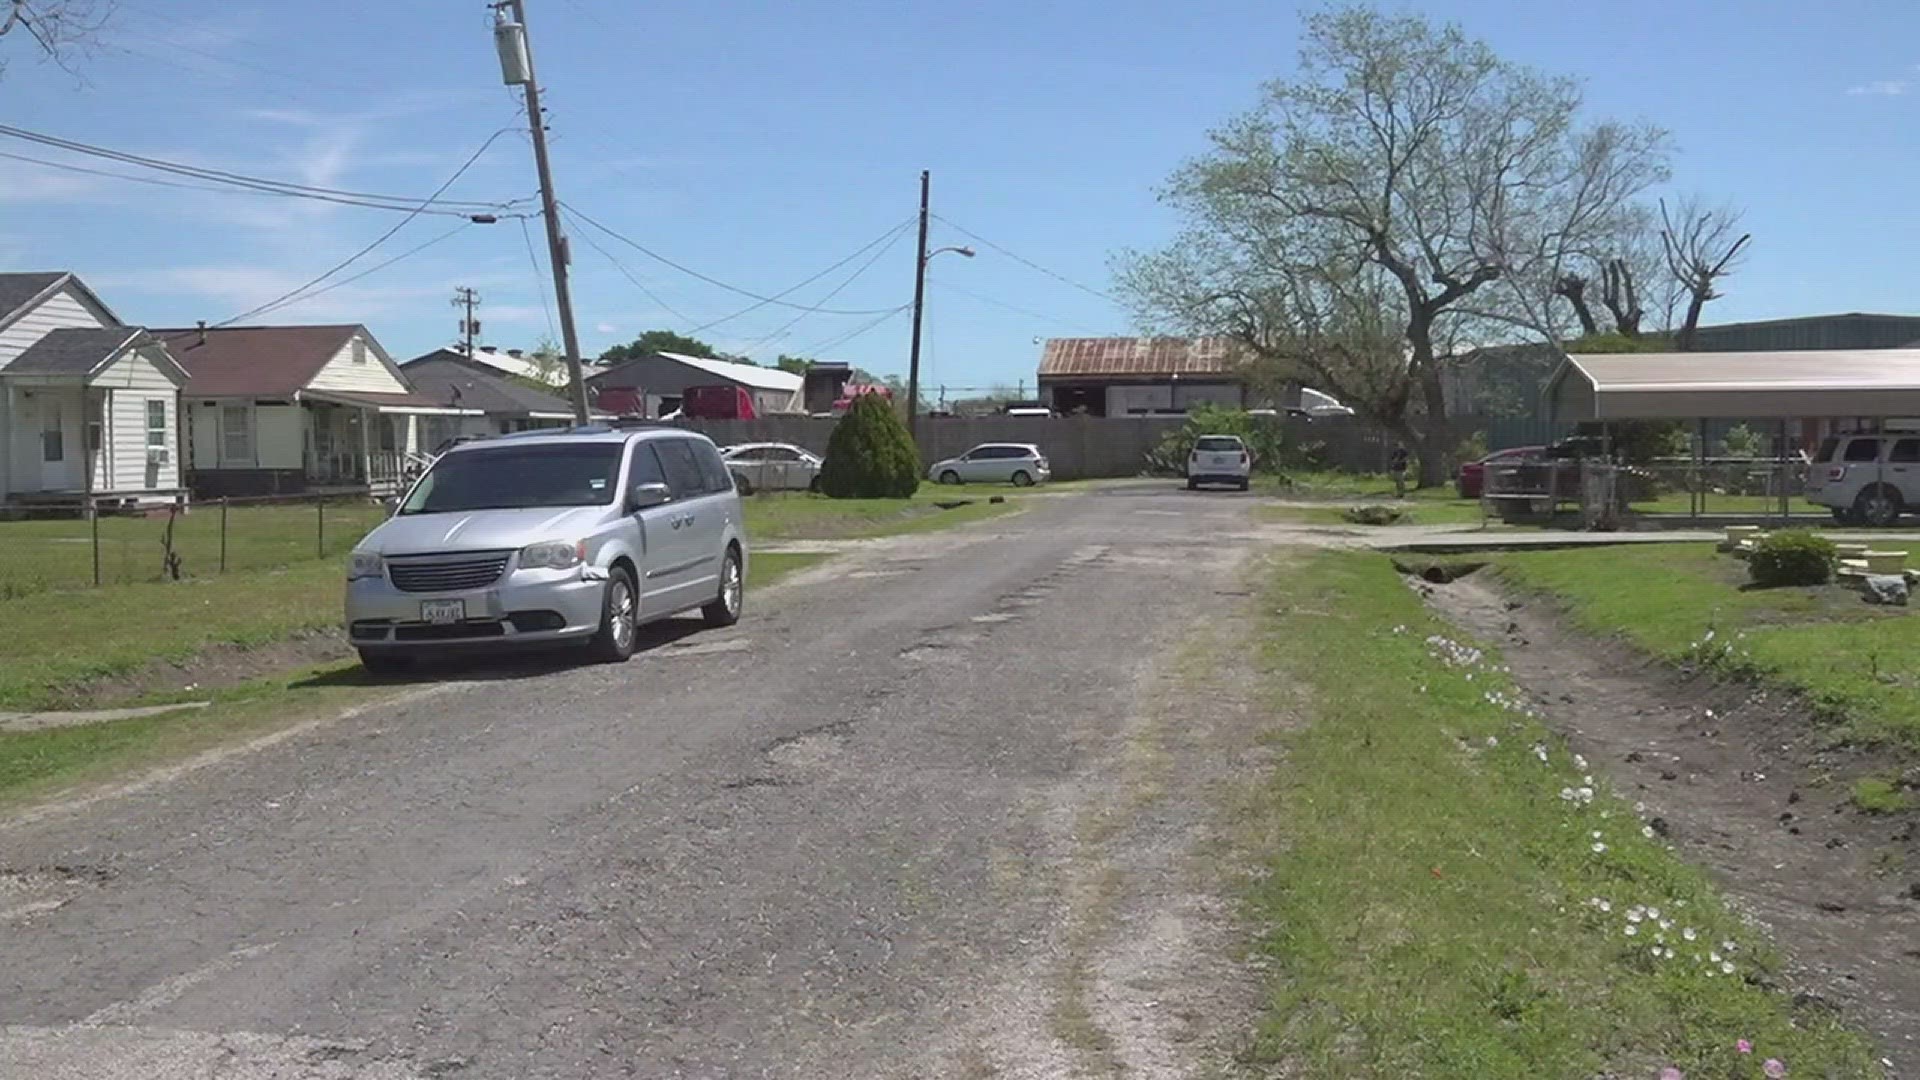 Residents living along 2nd Ave. in Port Arthur say the loud noises keep them up at night. One resident took the concern to City Council.